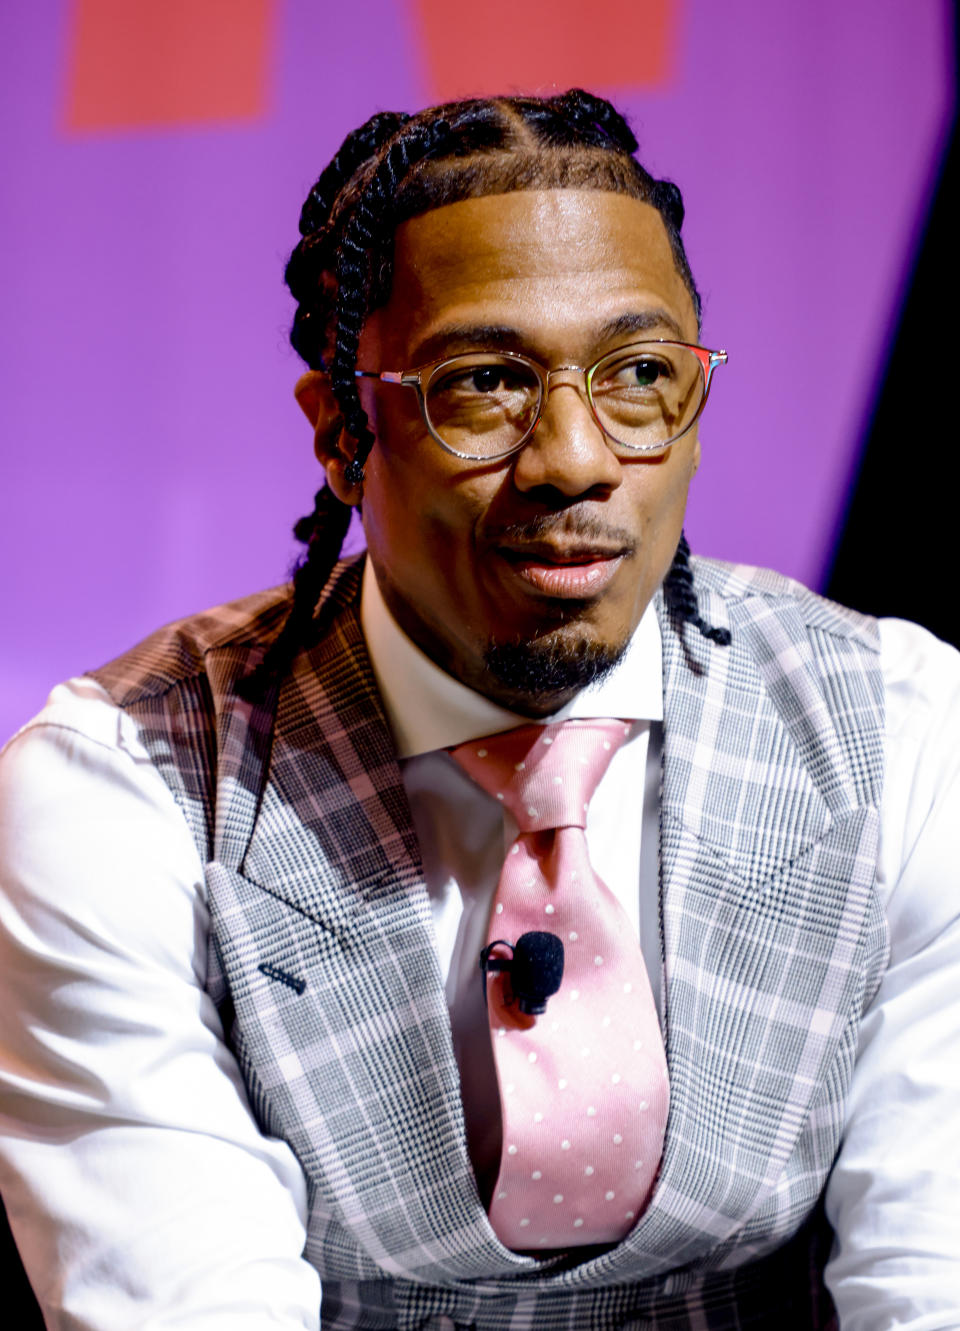 Nick Cannon in a plaid vest and pink polka-dot tie, speaking at an event